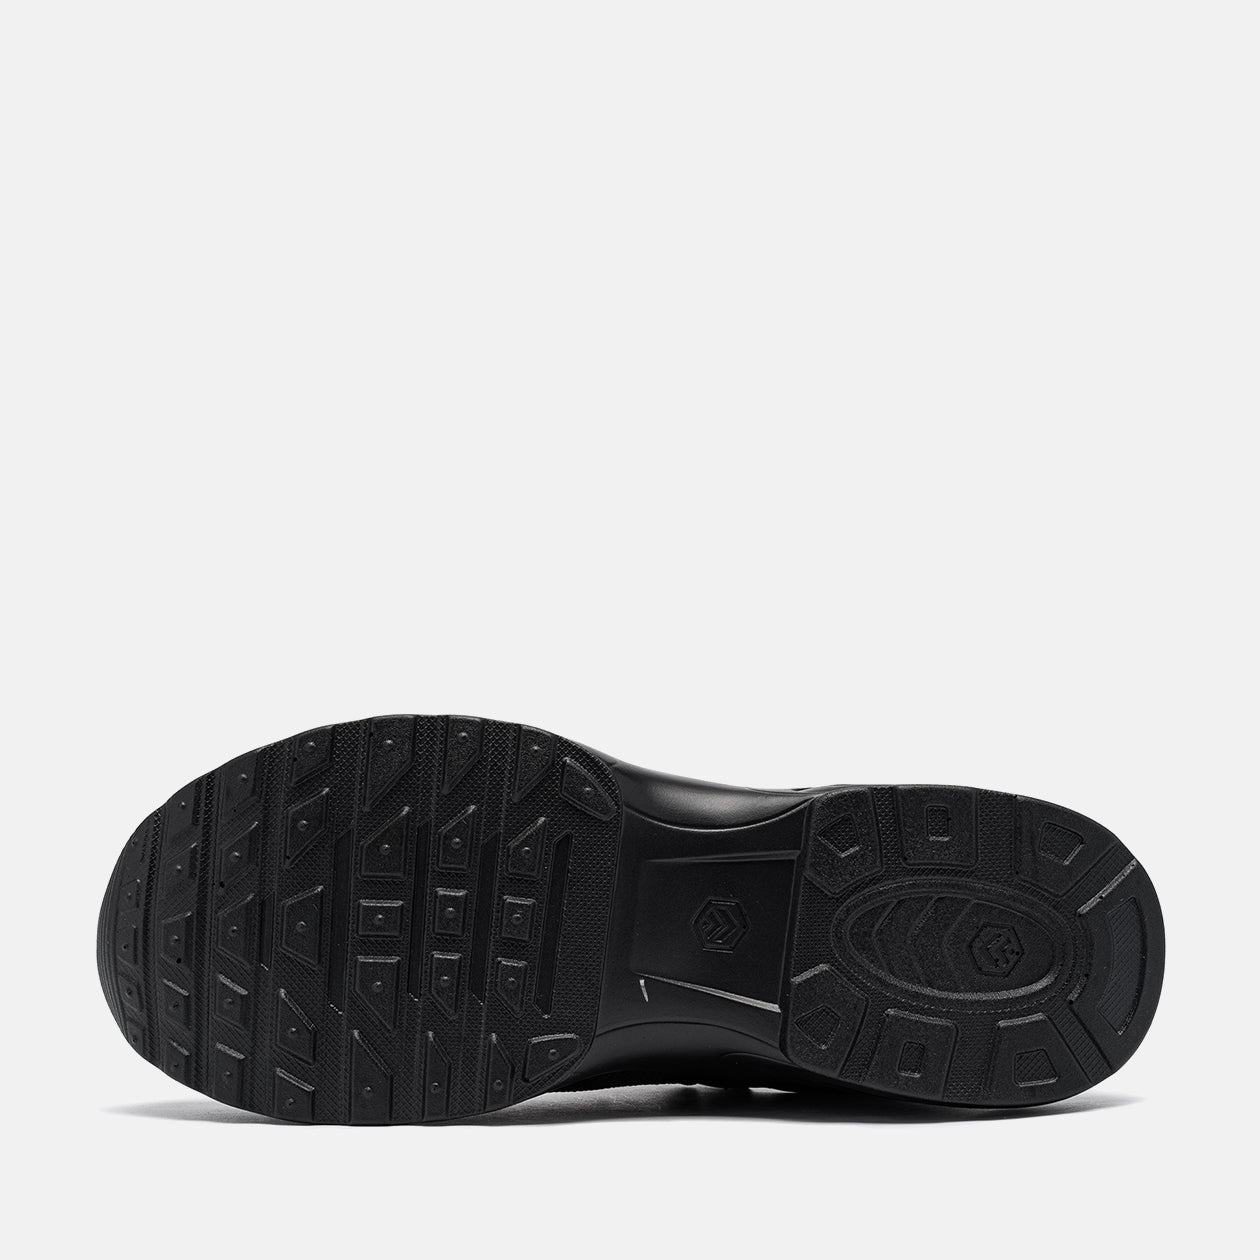 The slip resistant sole of safety shoe